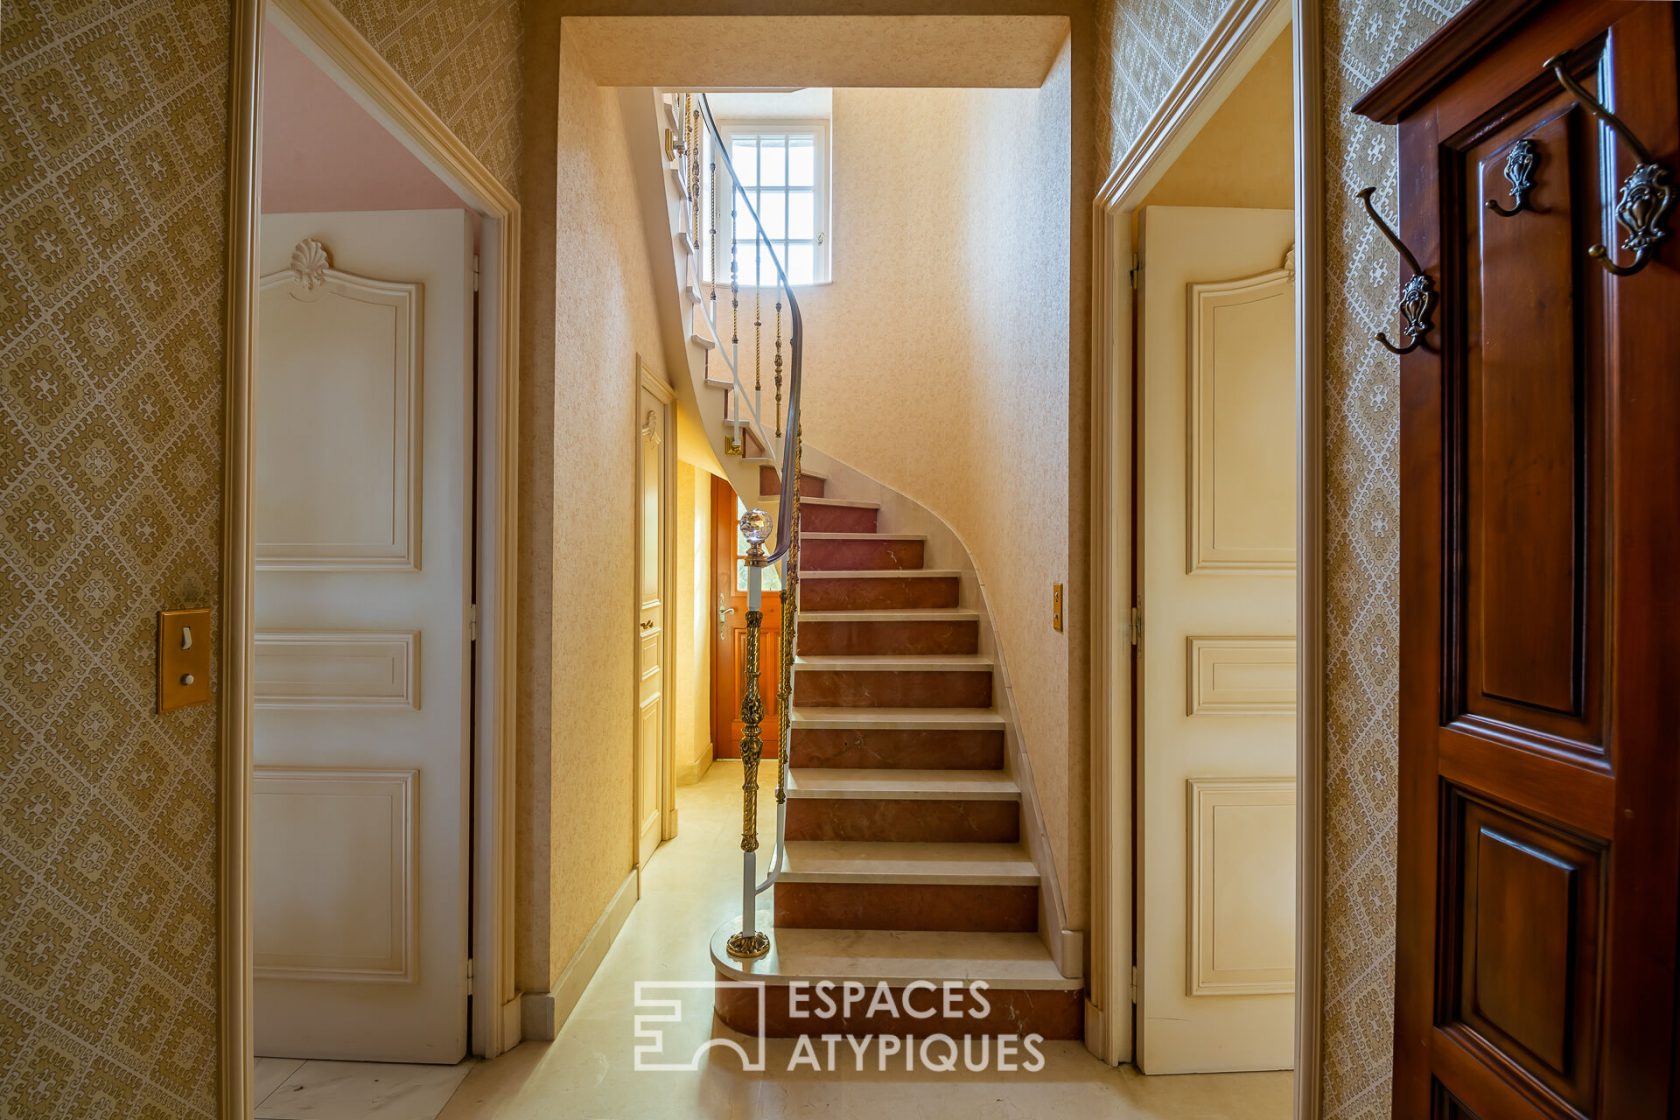 LA REMARQUABLE – Beautiful bourgeois house with its terrace and park – in the center of BROÖNS